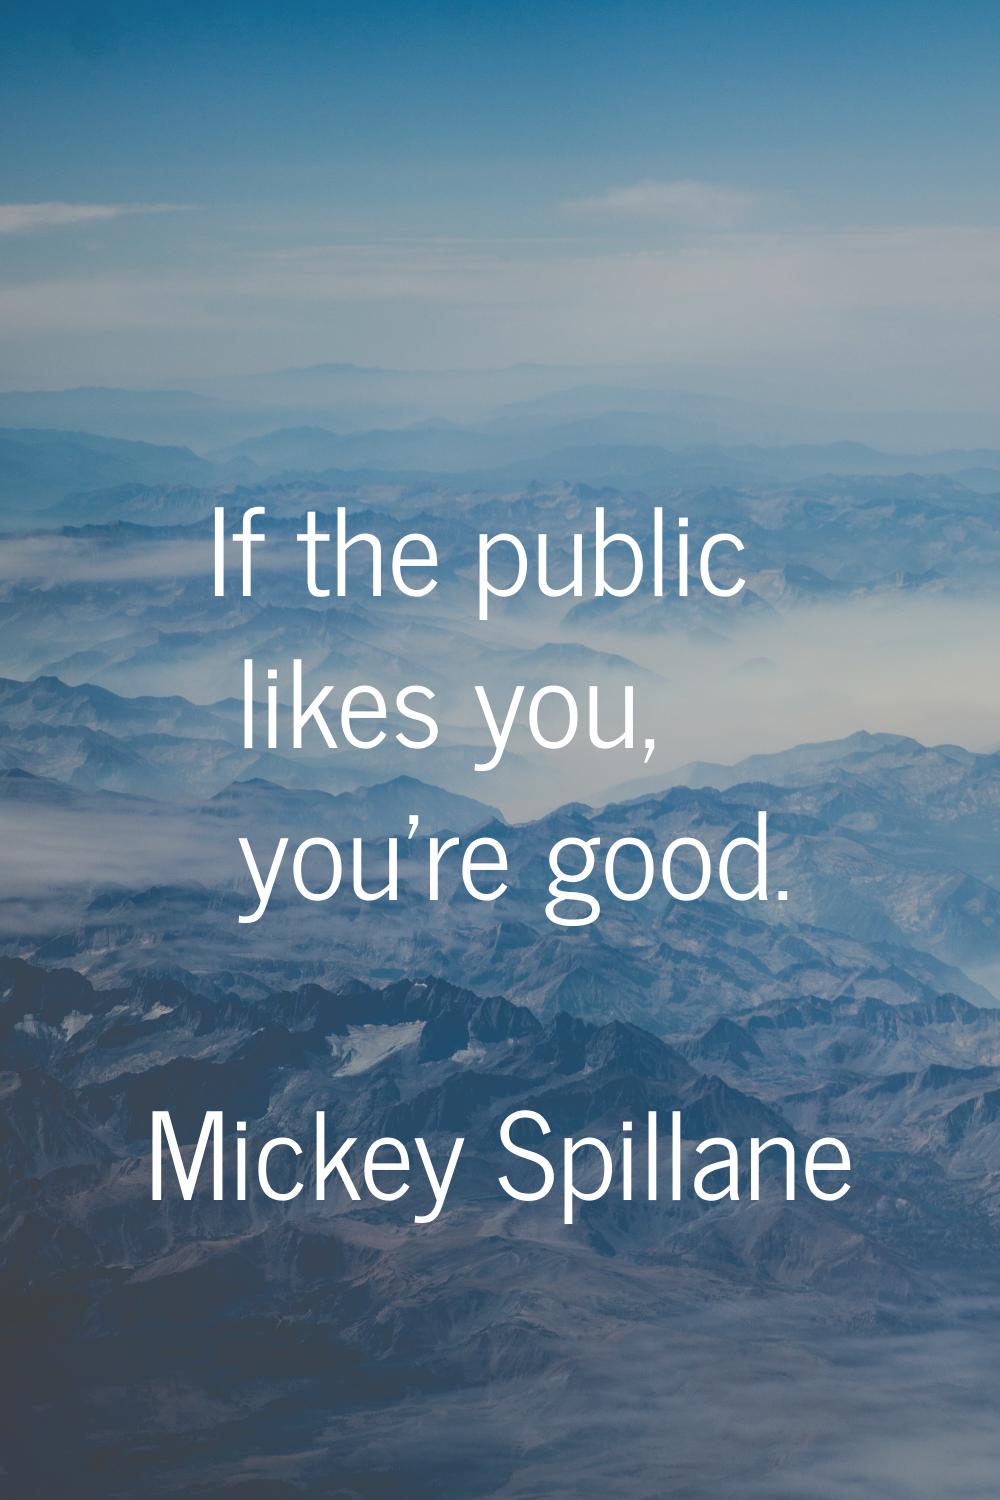 If the public likes you, you're good.